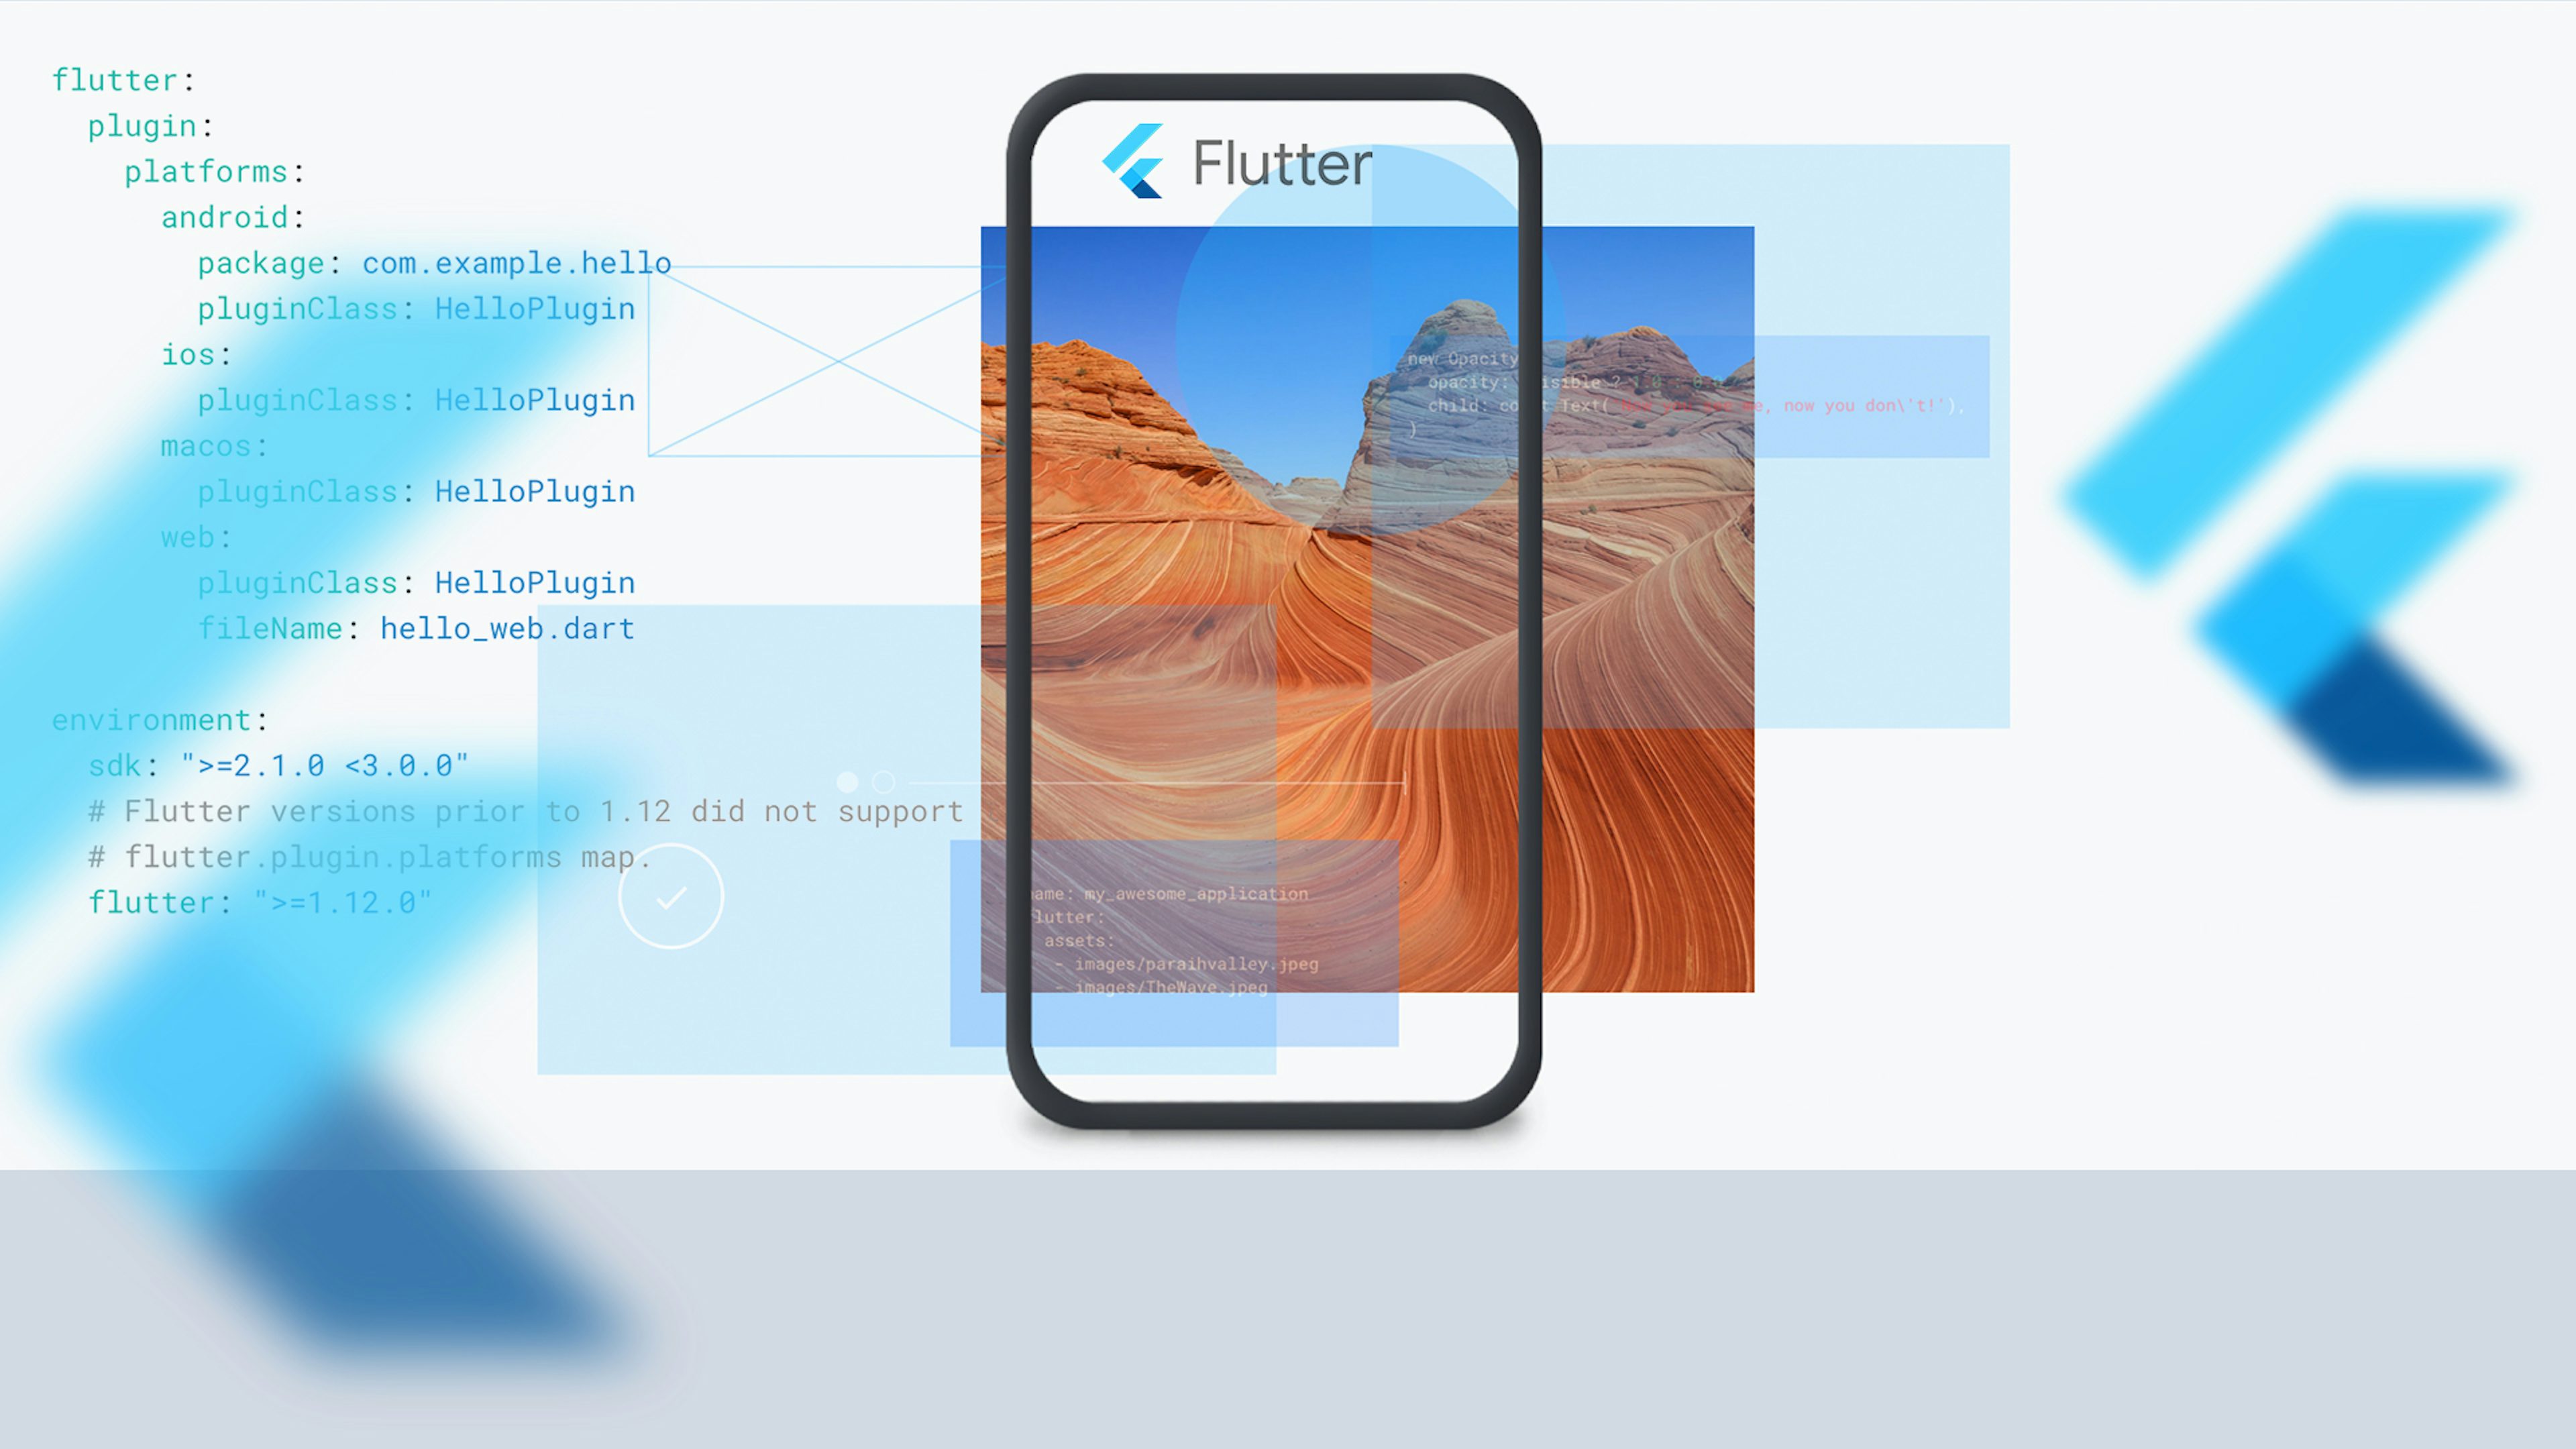 Developing a Flutter Plugin for Veriff's Mobile Products